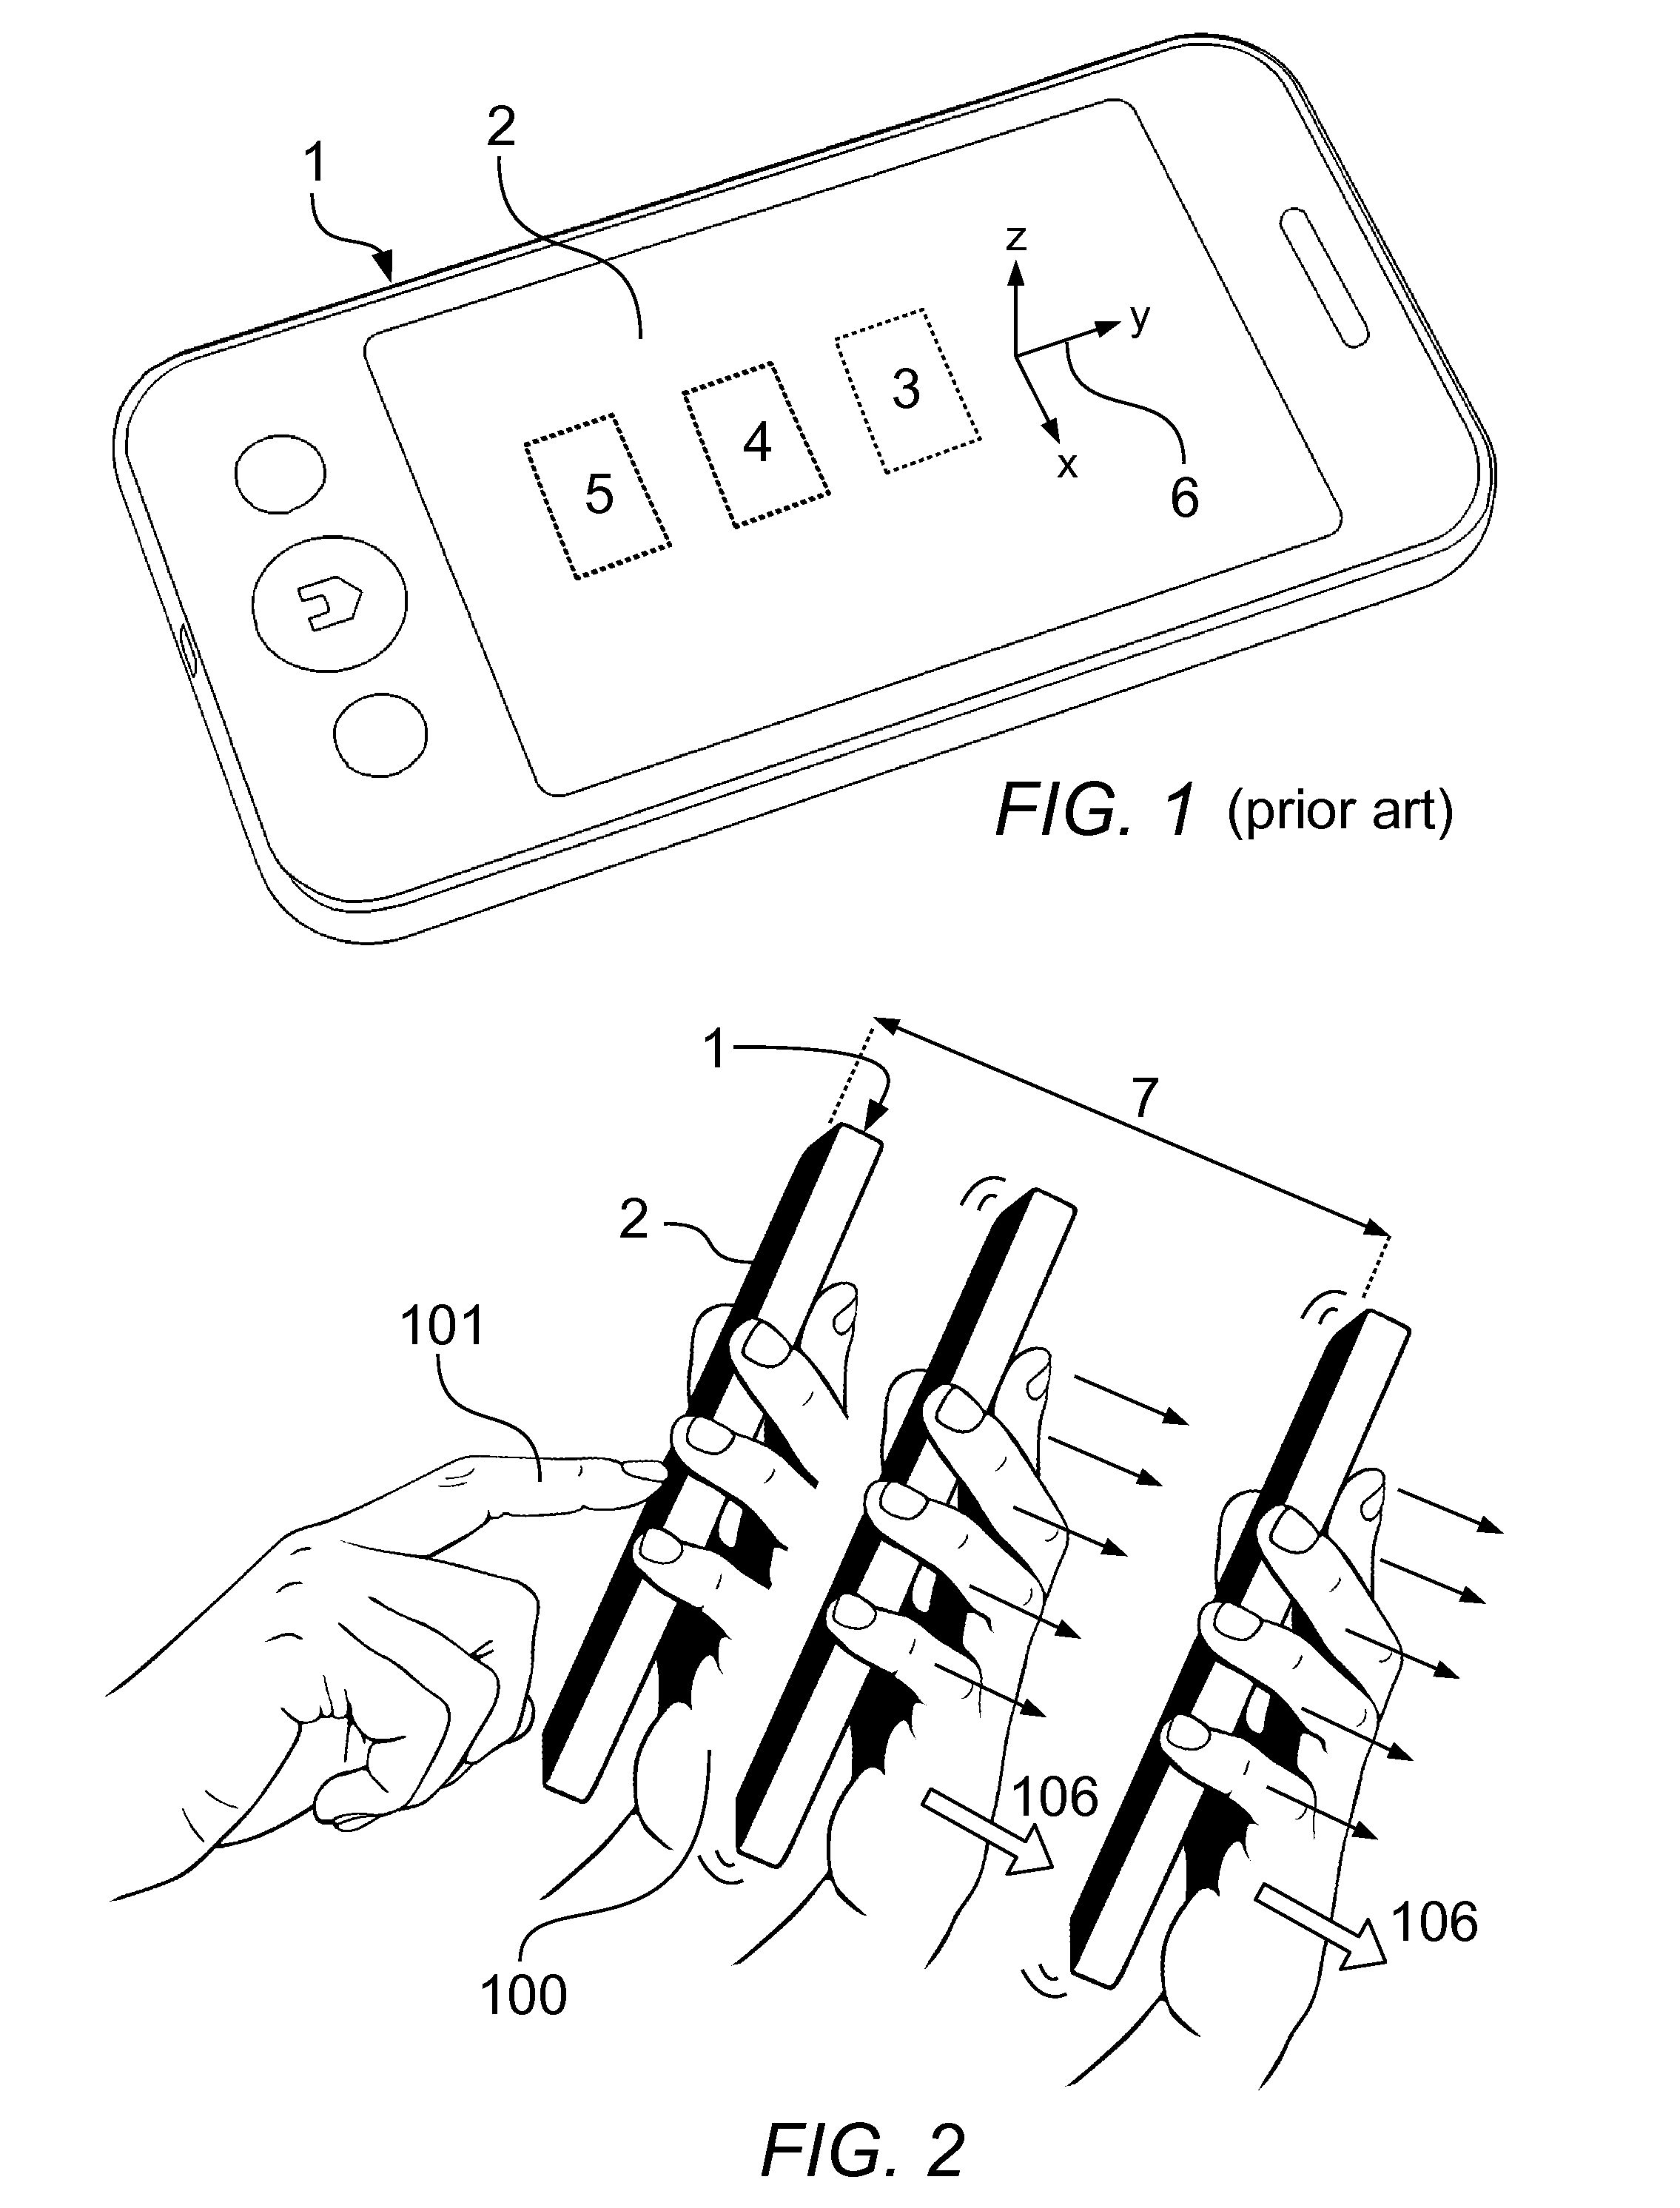 Method for gesture control